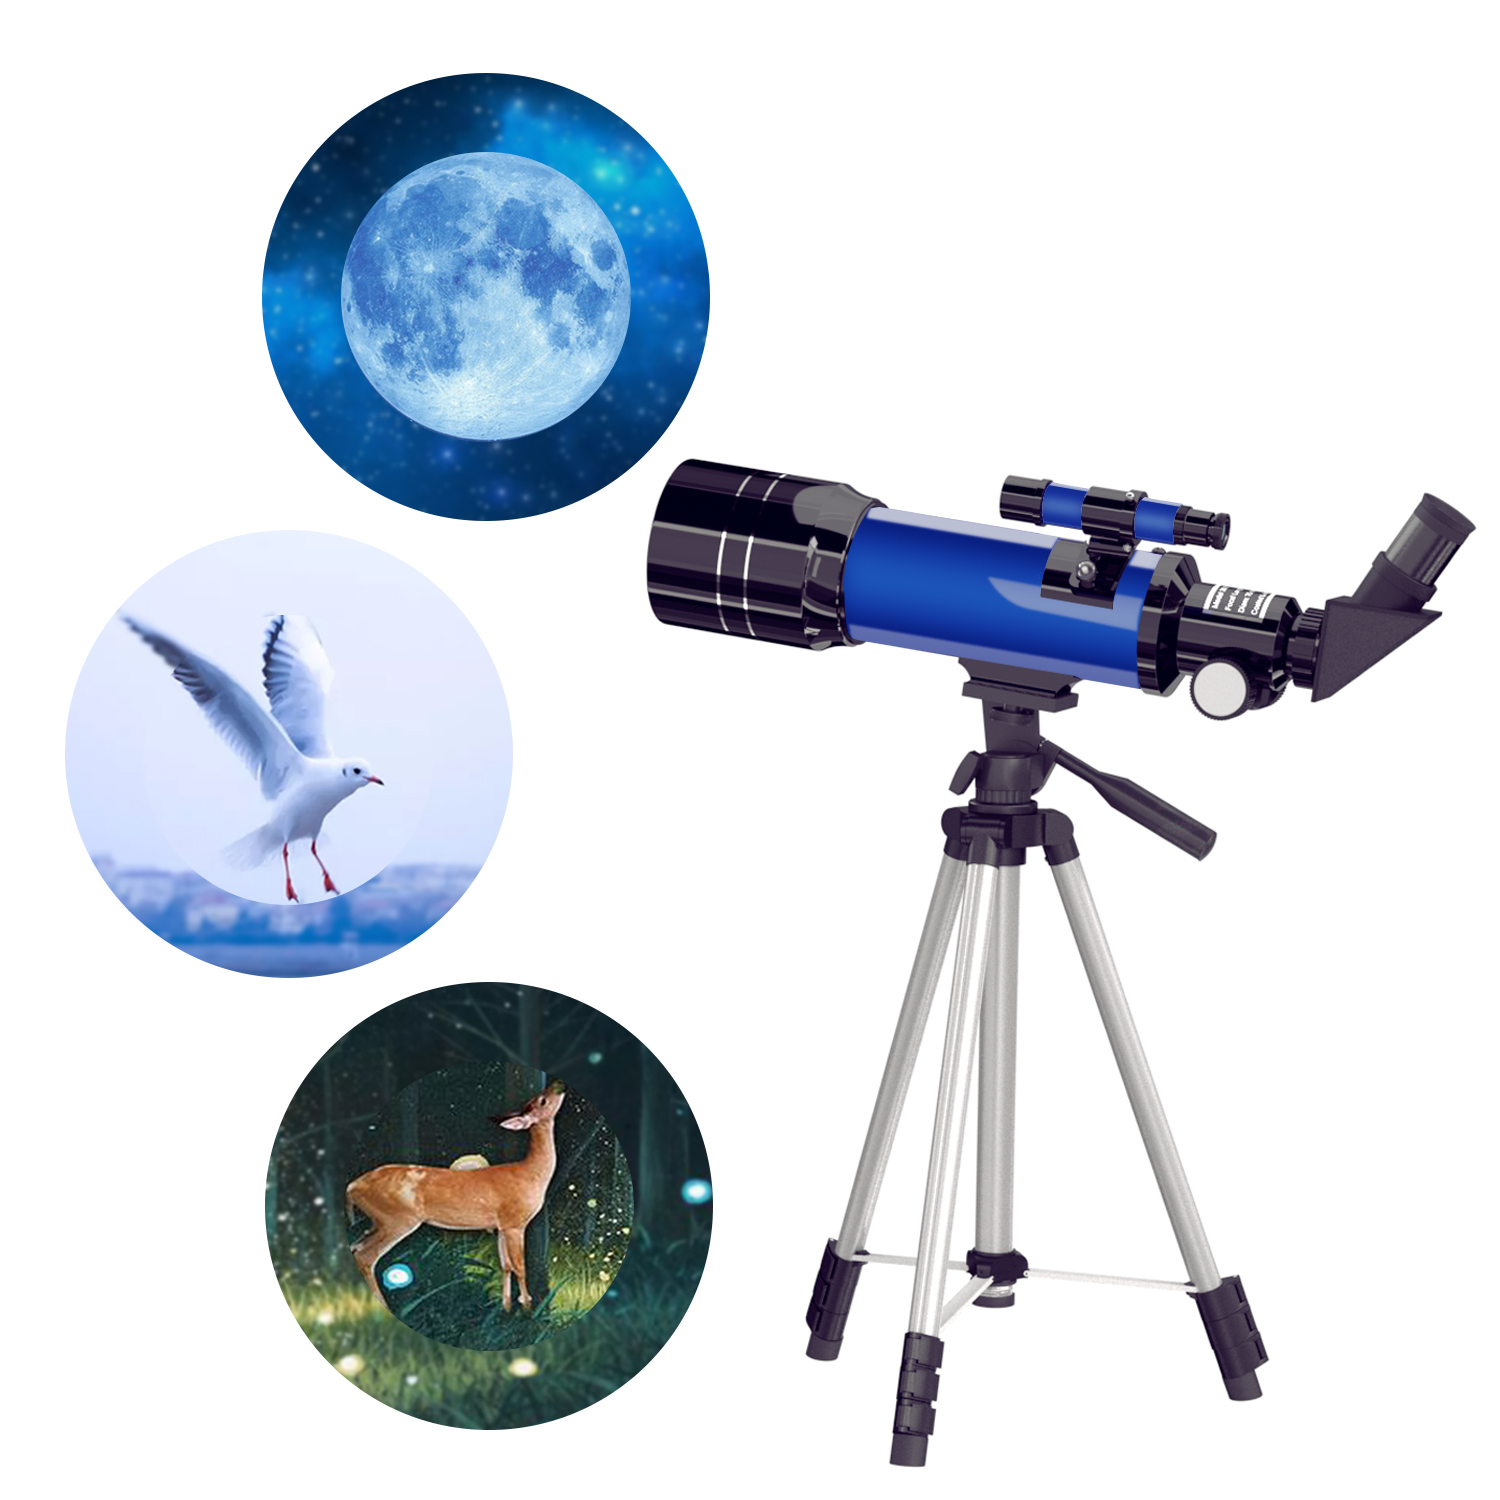 Telescope for Kids Beginners Adults, 70mm Astronomy Refractor Telescope with Adjustable Tripod - Perfect Telescope Gift for Kids